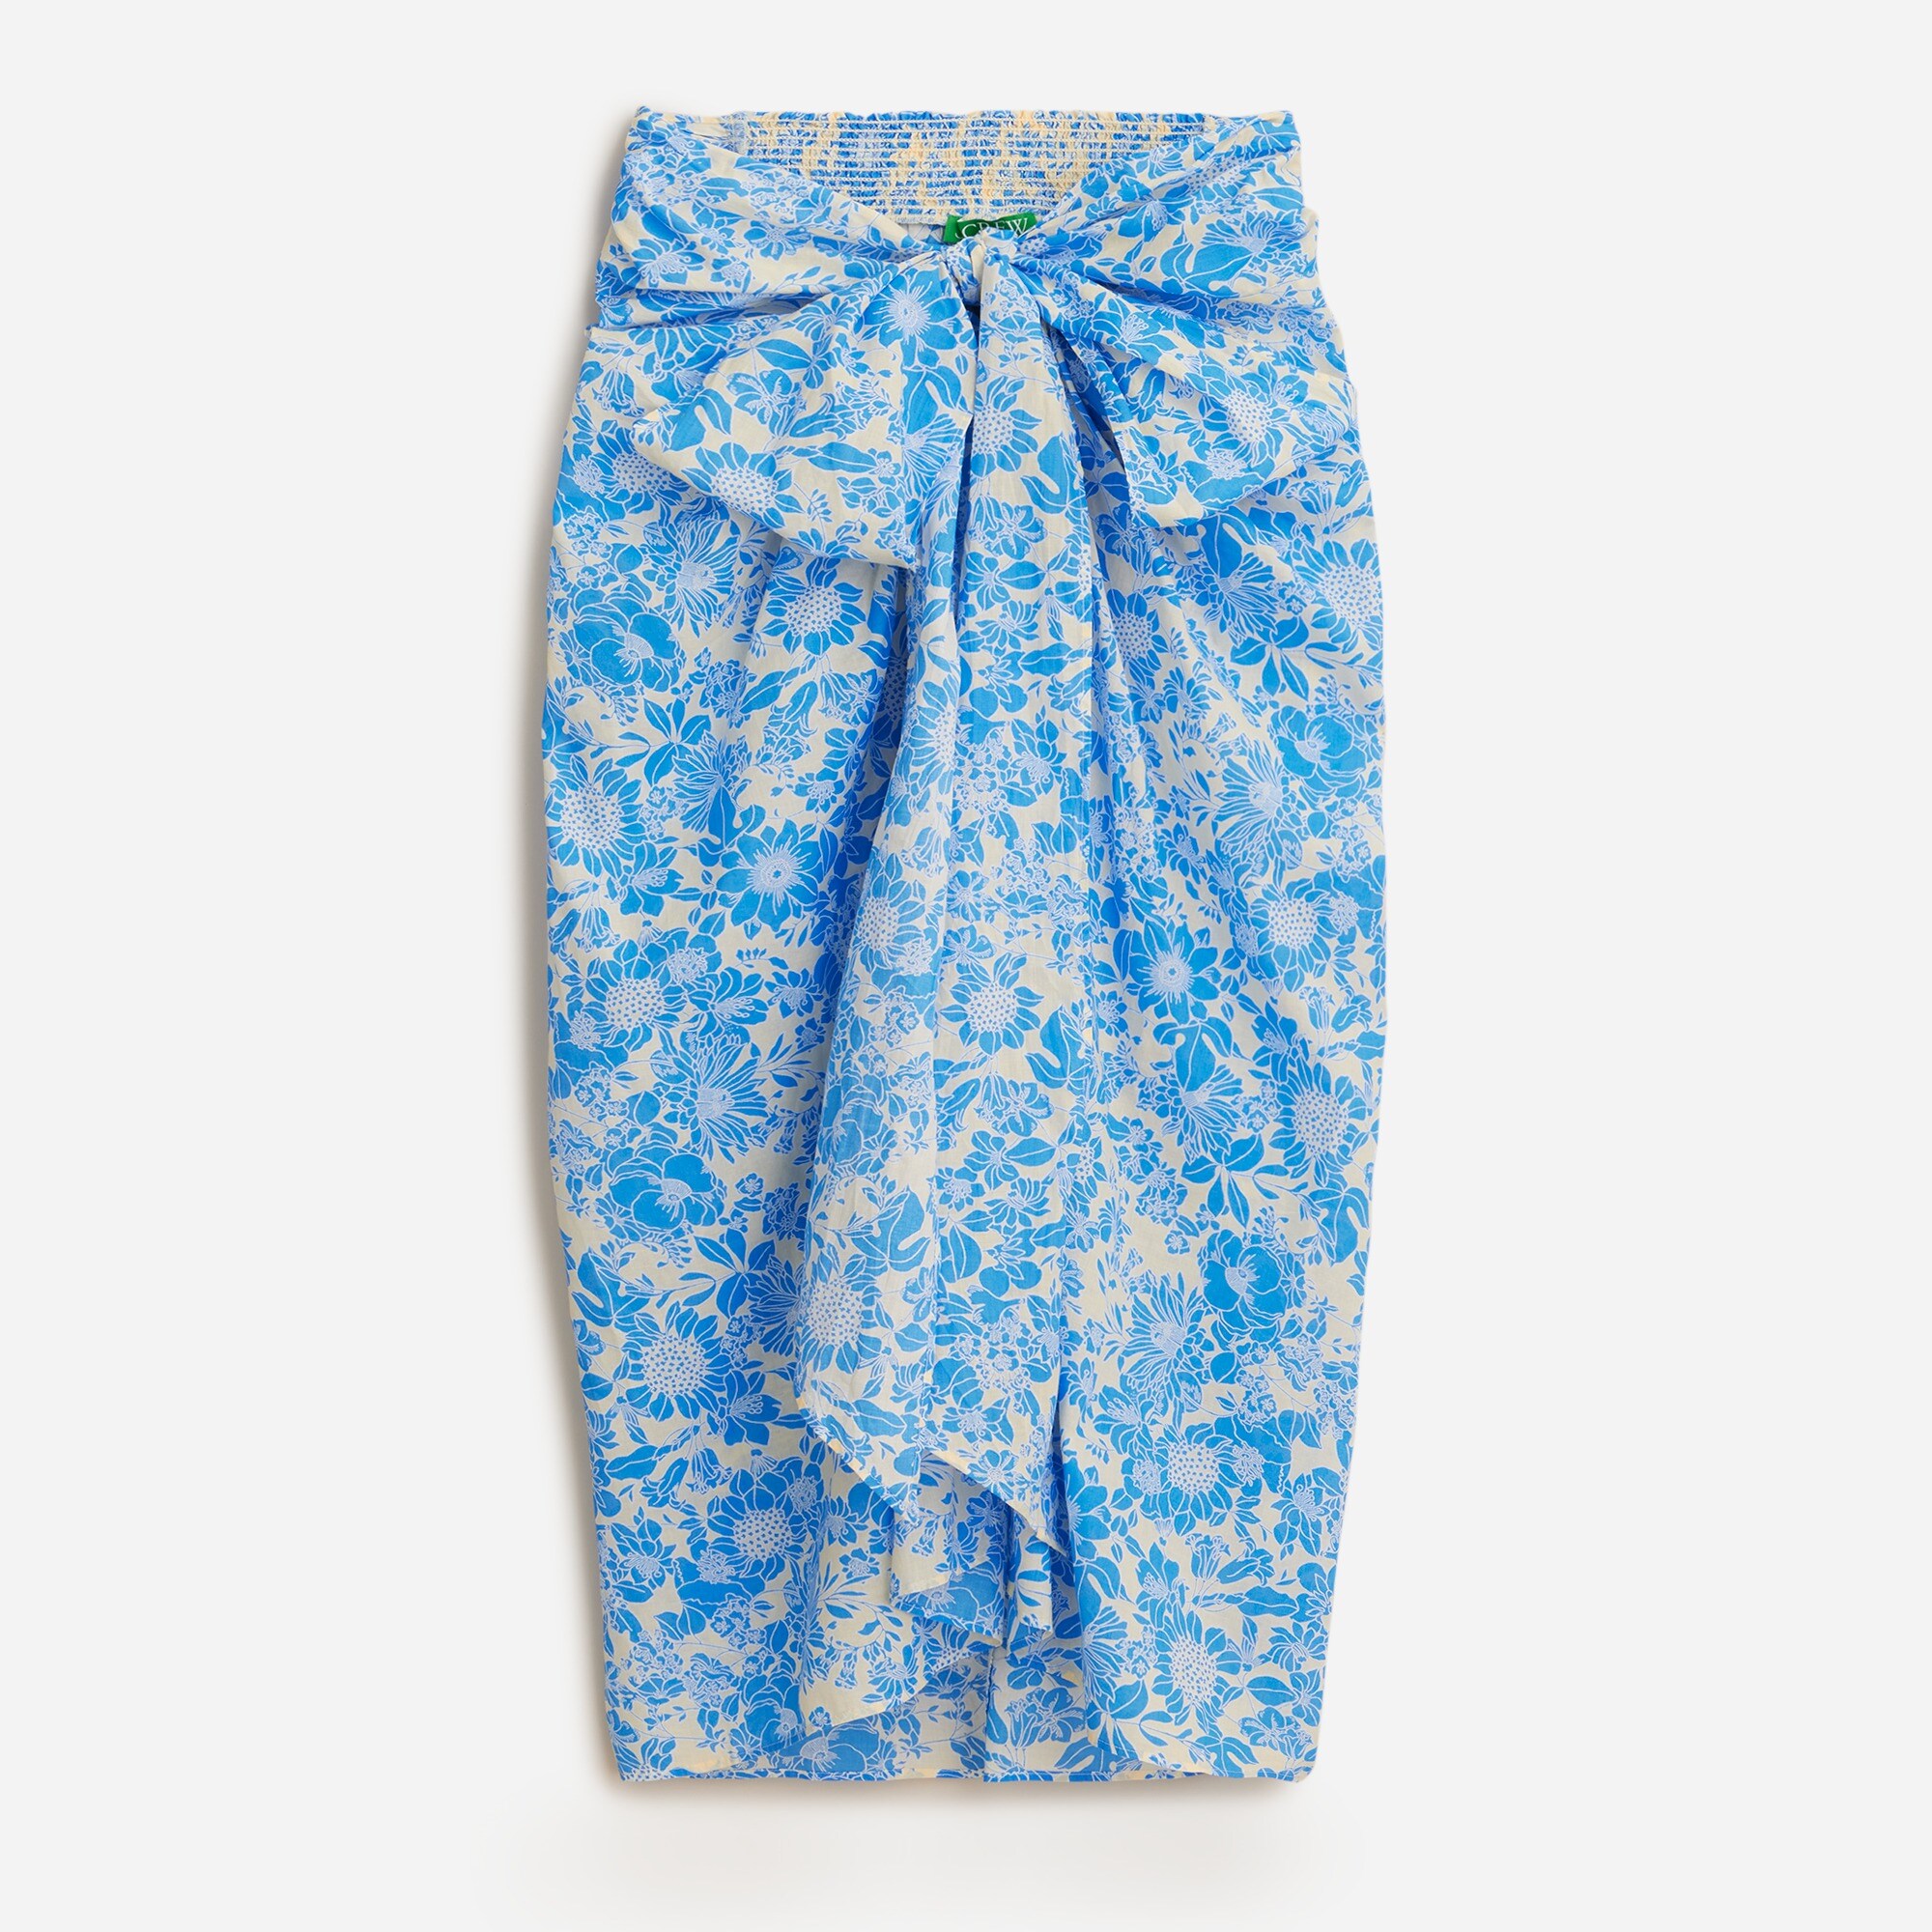  Draped sarong in blue floral